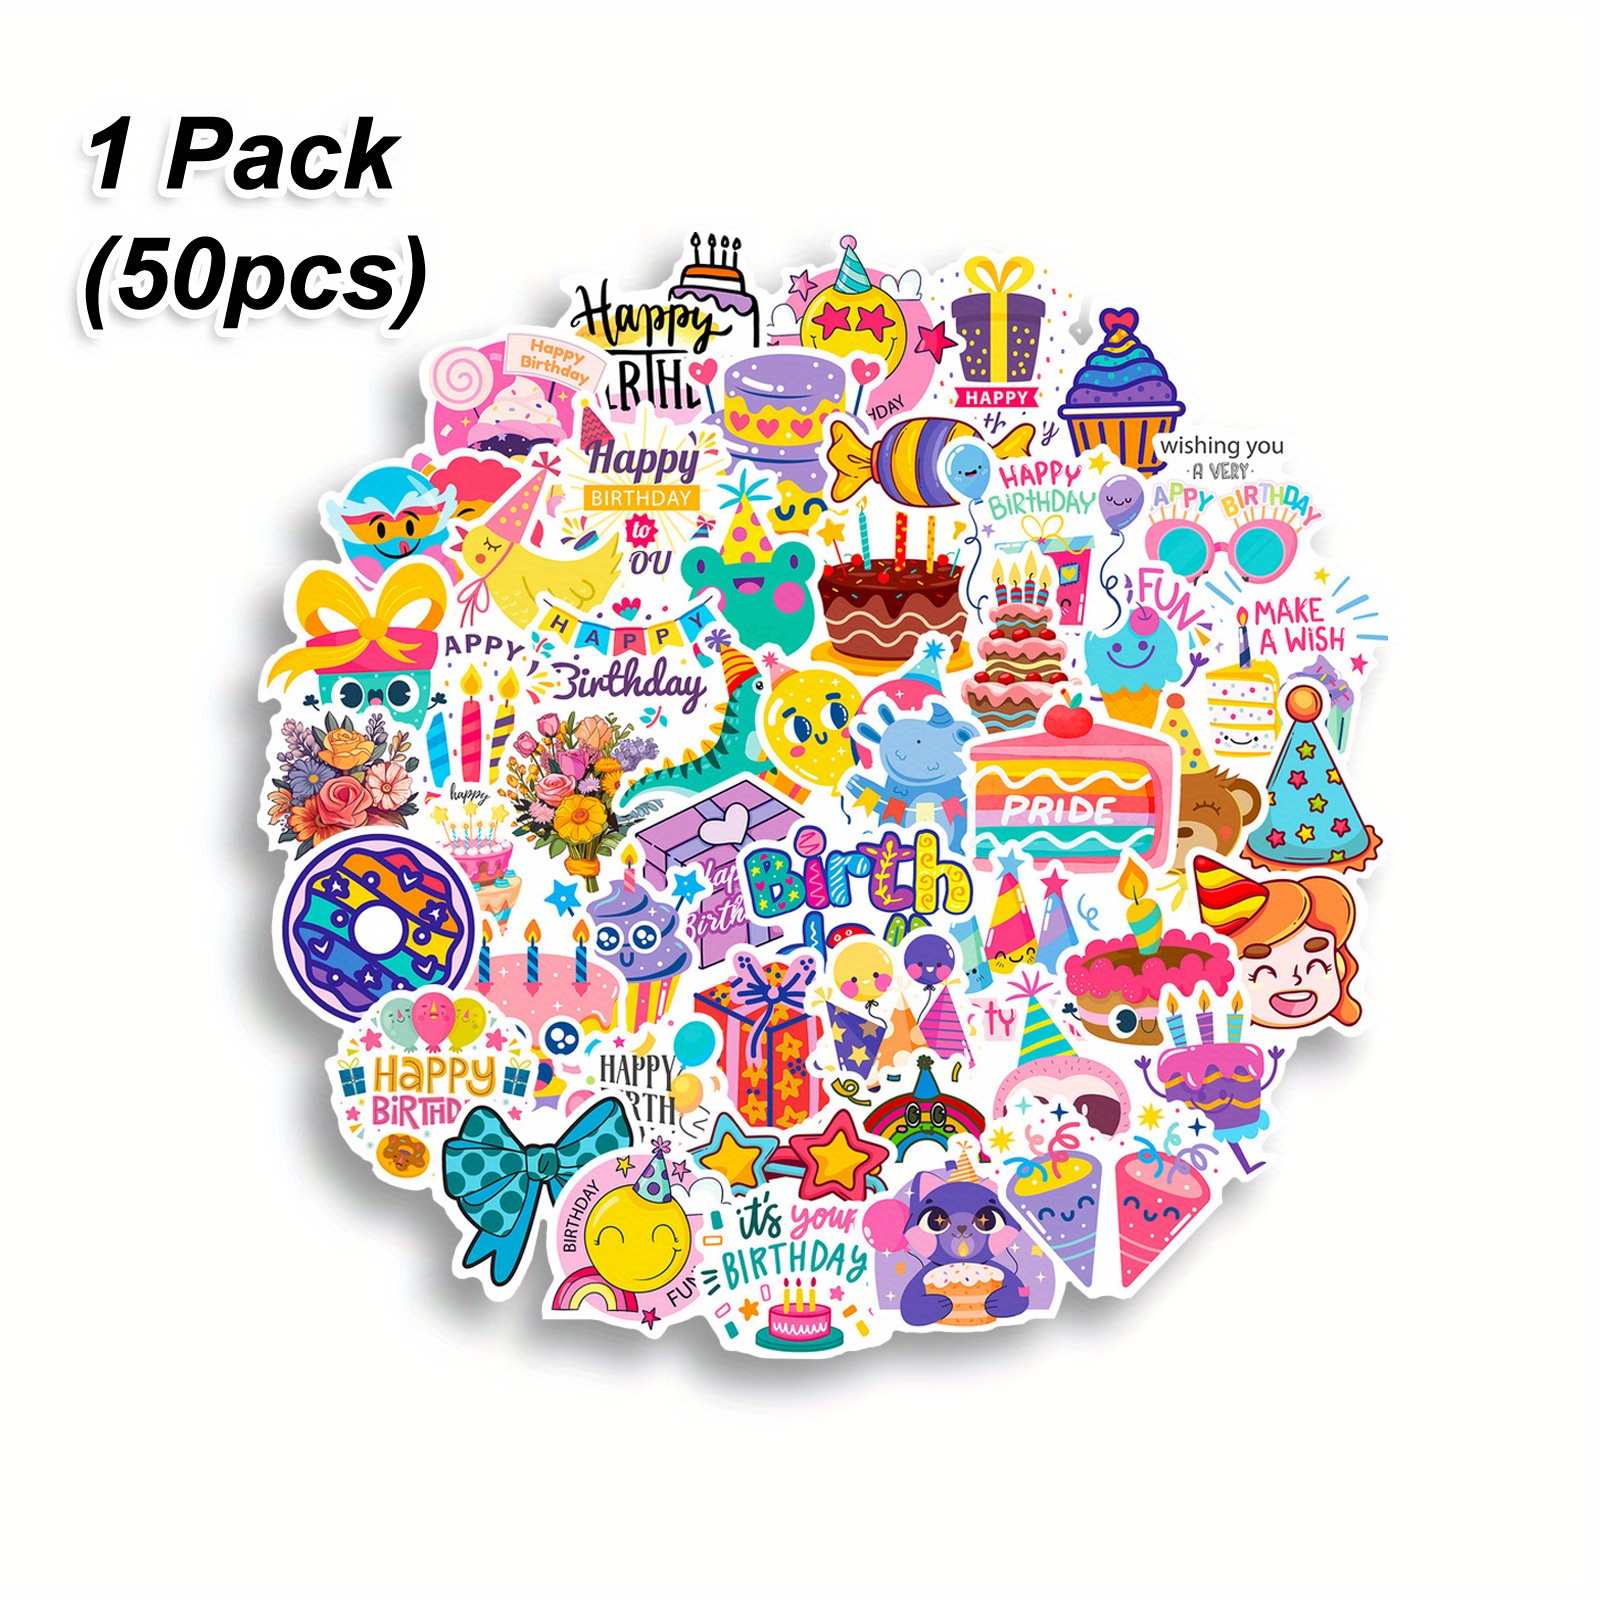 dufibo 100pcs happy birthday stickers birthday party stickers candy cake  stickers, cute packaging,colorful waterproof stickers,vinyl